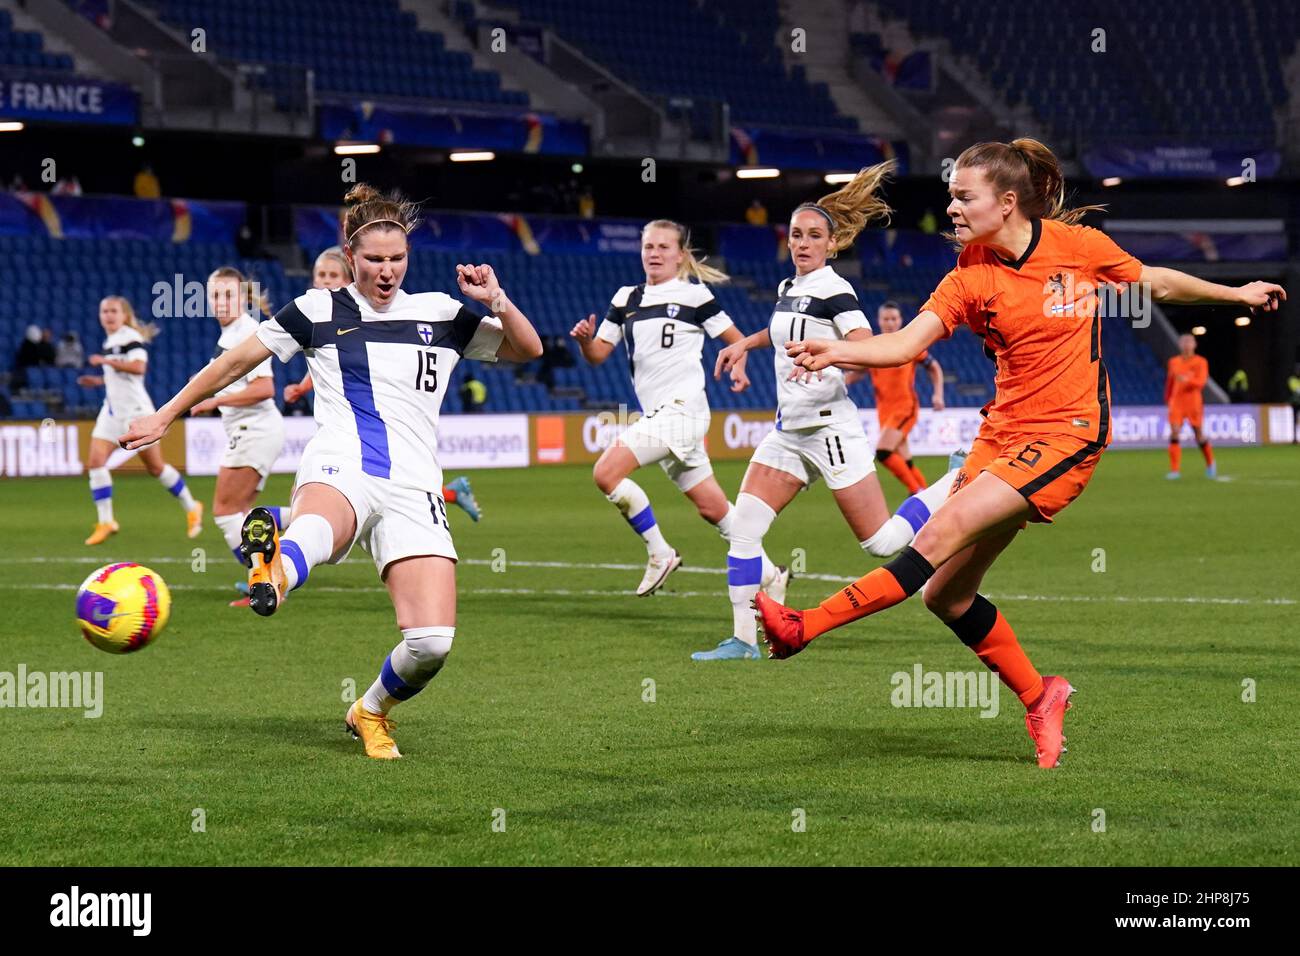 LE HAVRE, FRANCE - FEBRUARY 19: Esmee Brugts of the Netherlands and Anna Westerlund of Finland during the Tournoi de France 2022 match between Finland and Netherlands at Stade Oceane on February 19, 2022 in Le Havre, France (Photo by Rene Nijhuis/Orange Pictures) Stock Photo